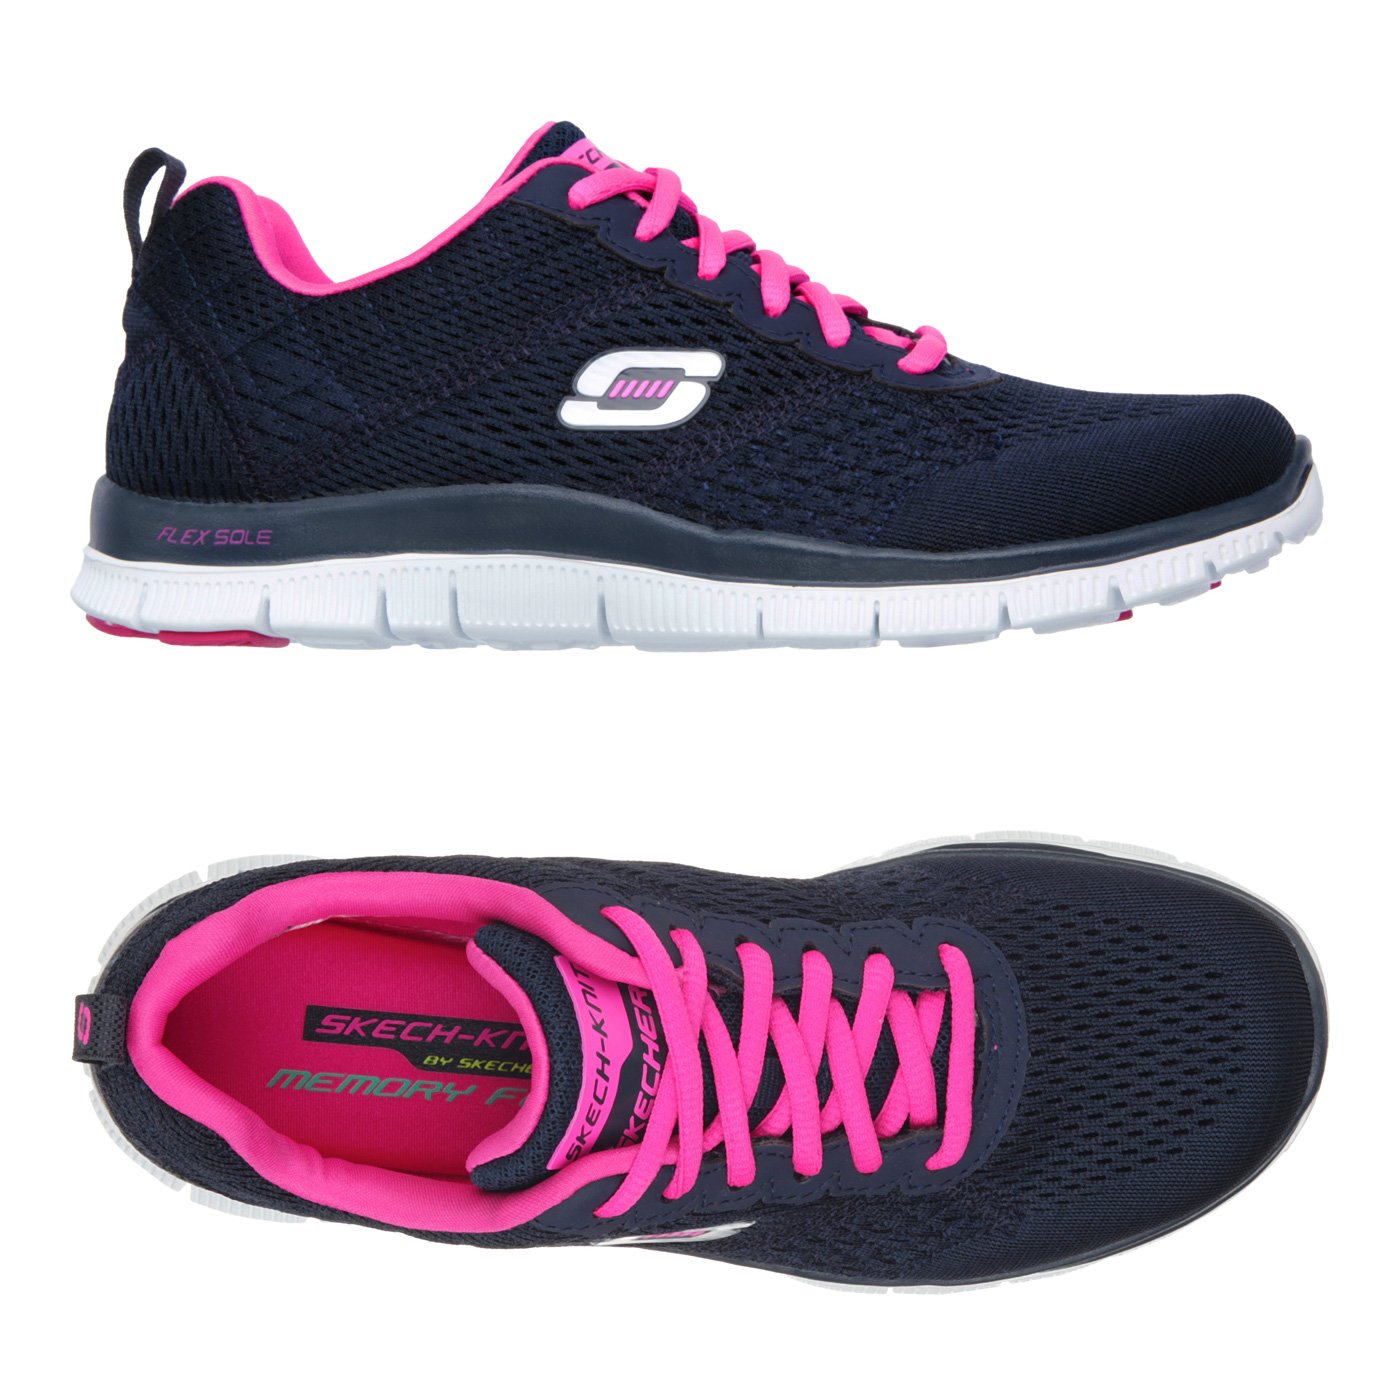 skechers obvious choice